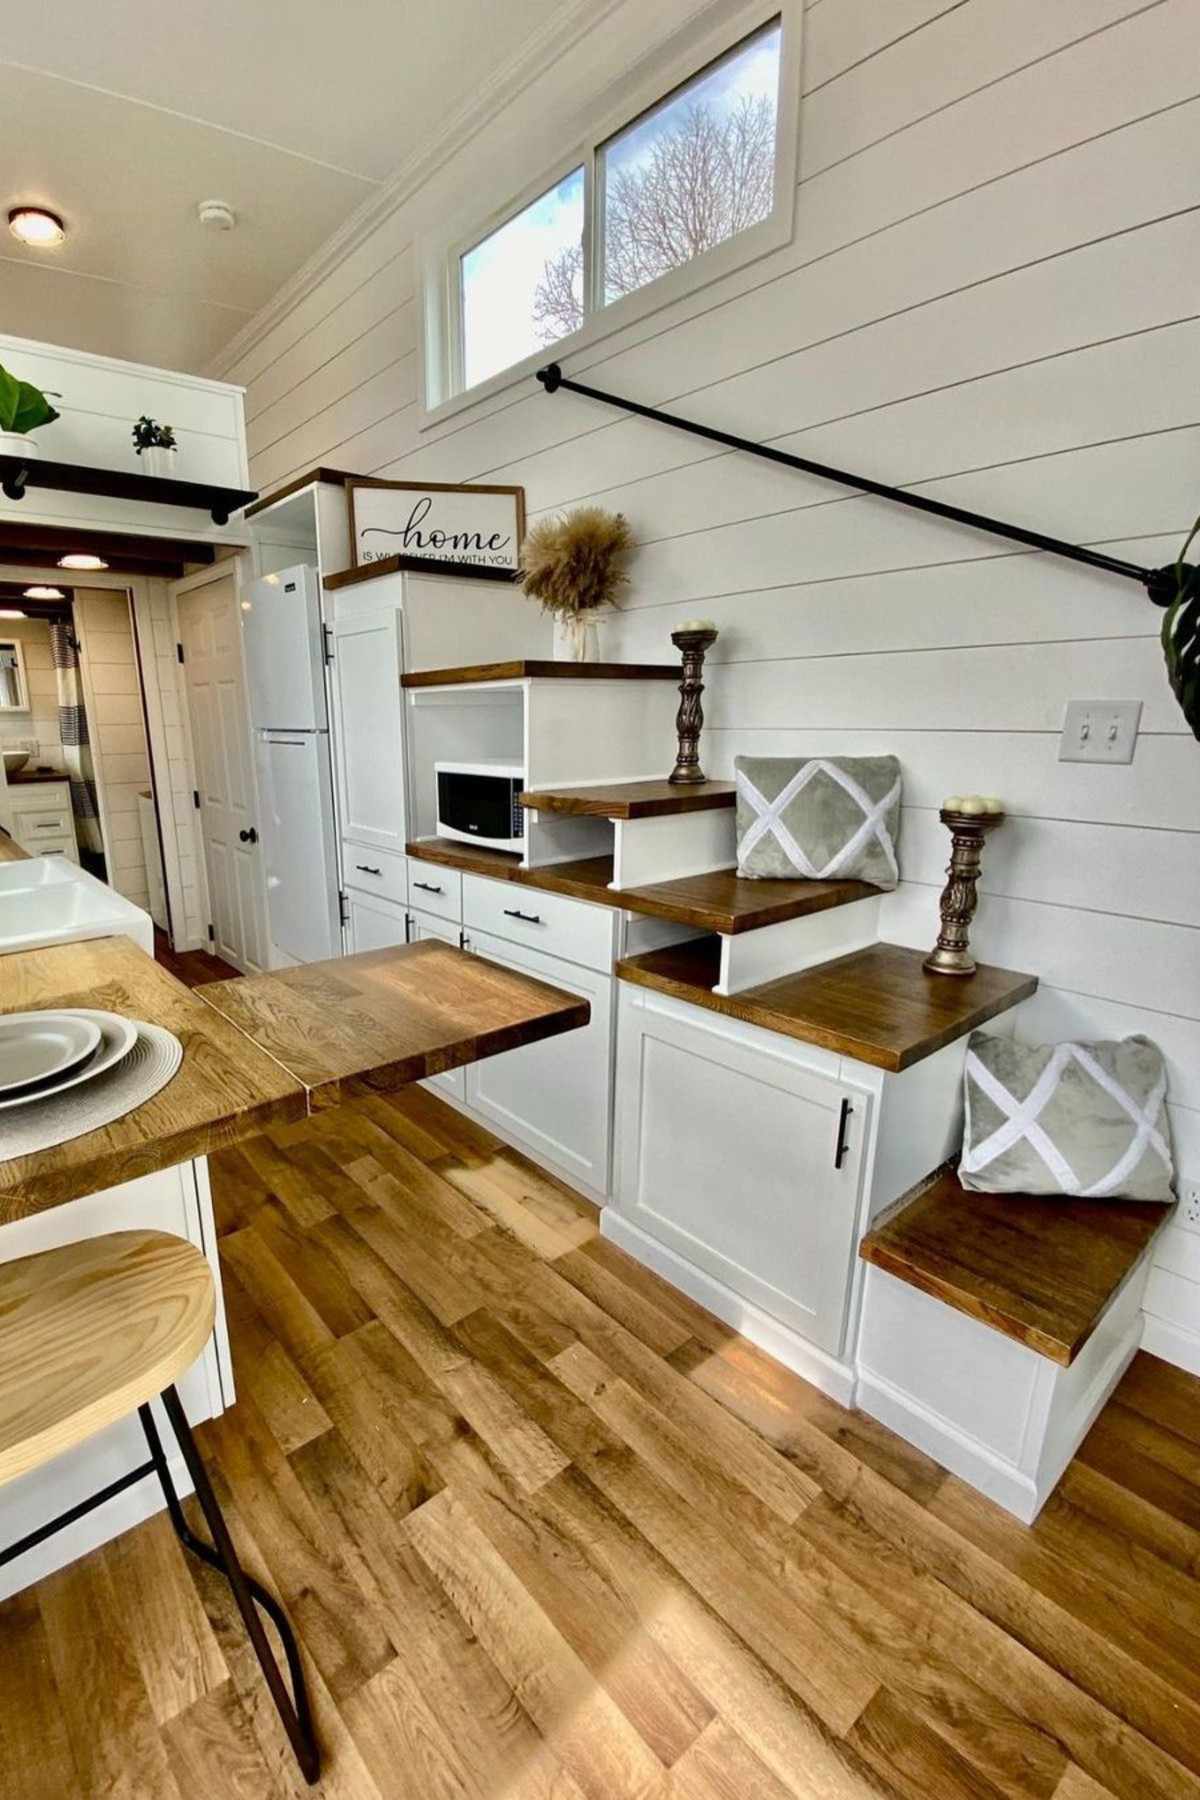 Tiny House Mini Mansion - Room By Room Tour INSIDE This Amazing Tiny House